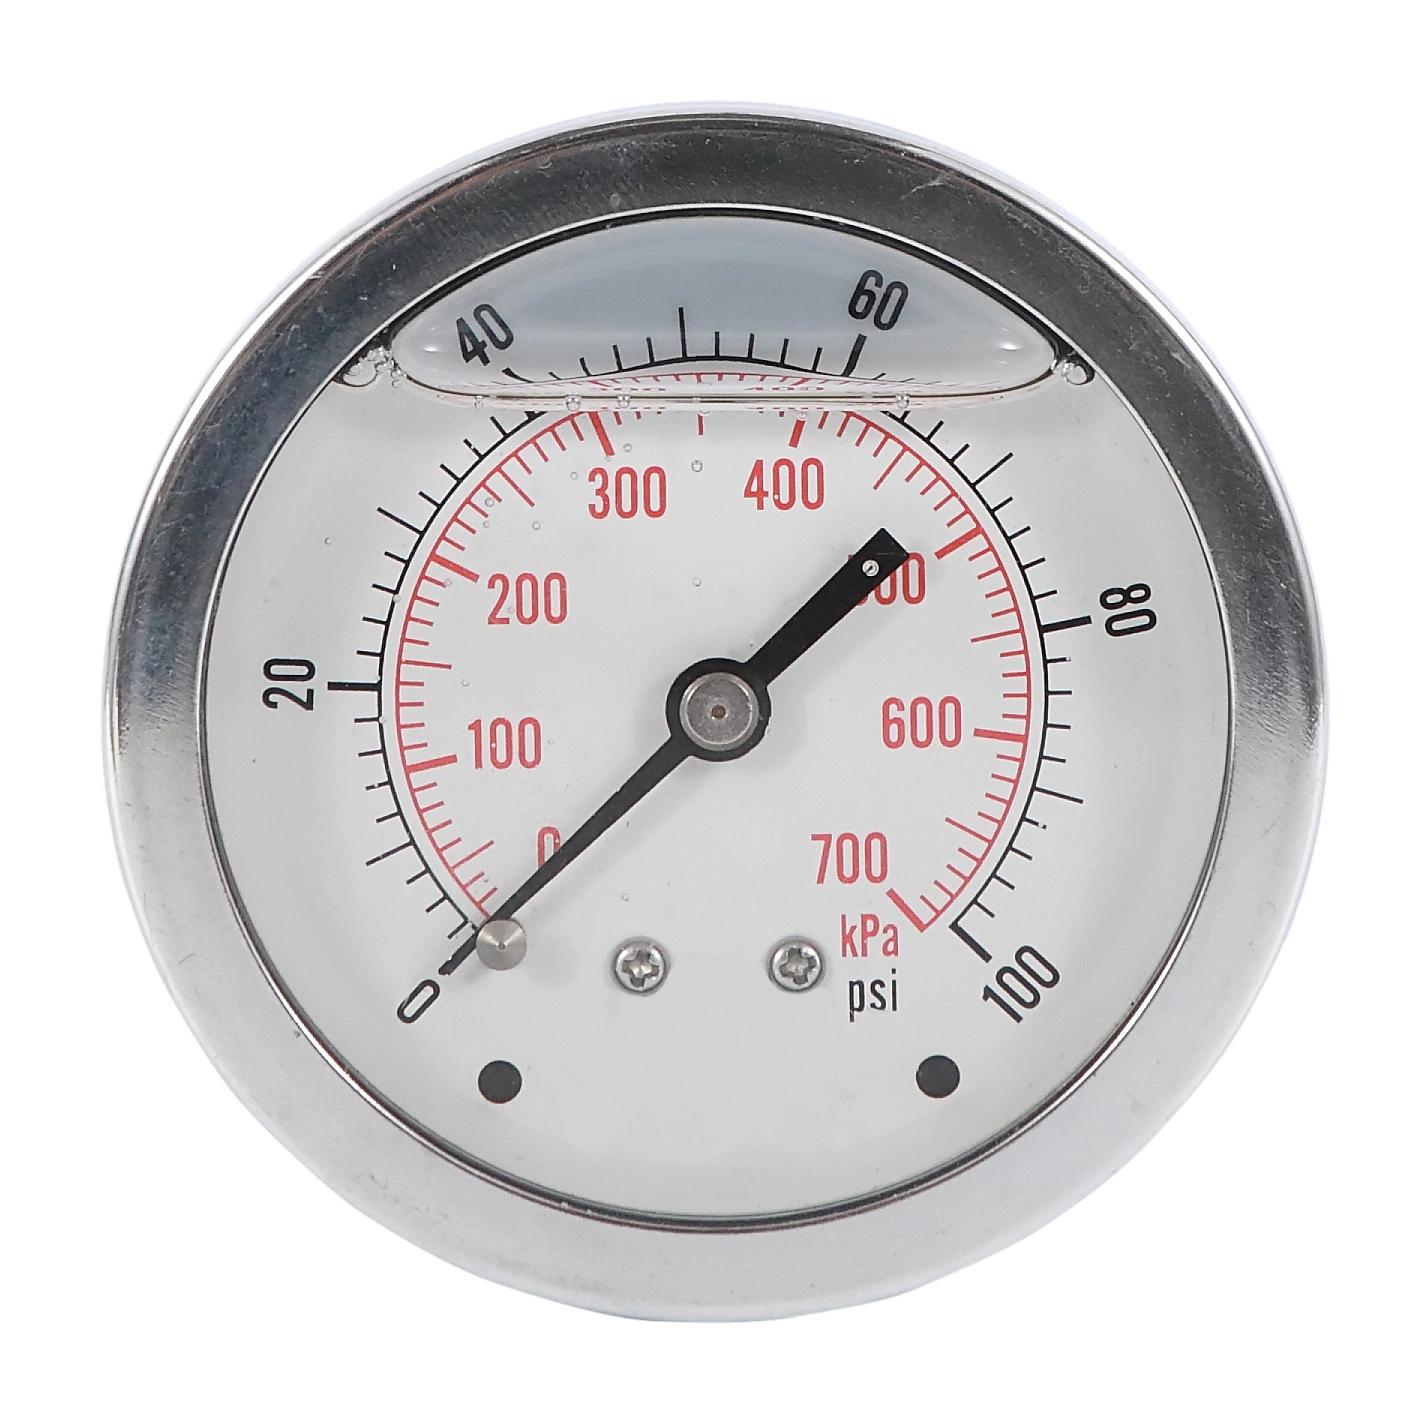 Pressure Gauge for Industrial Liquid Oil Filter/Filtration, Water Treatment Plant